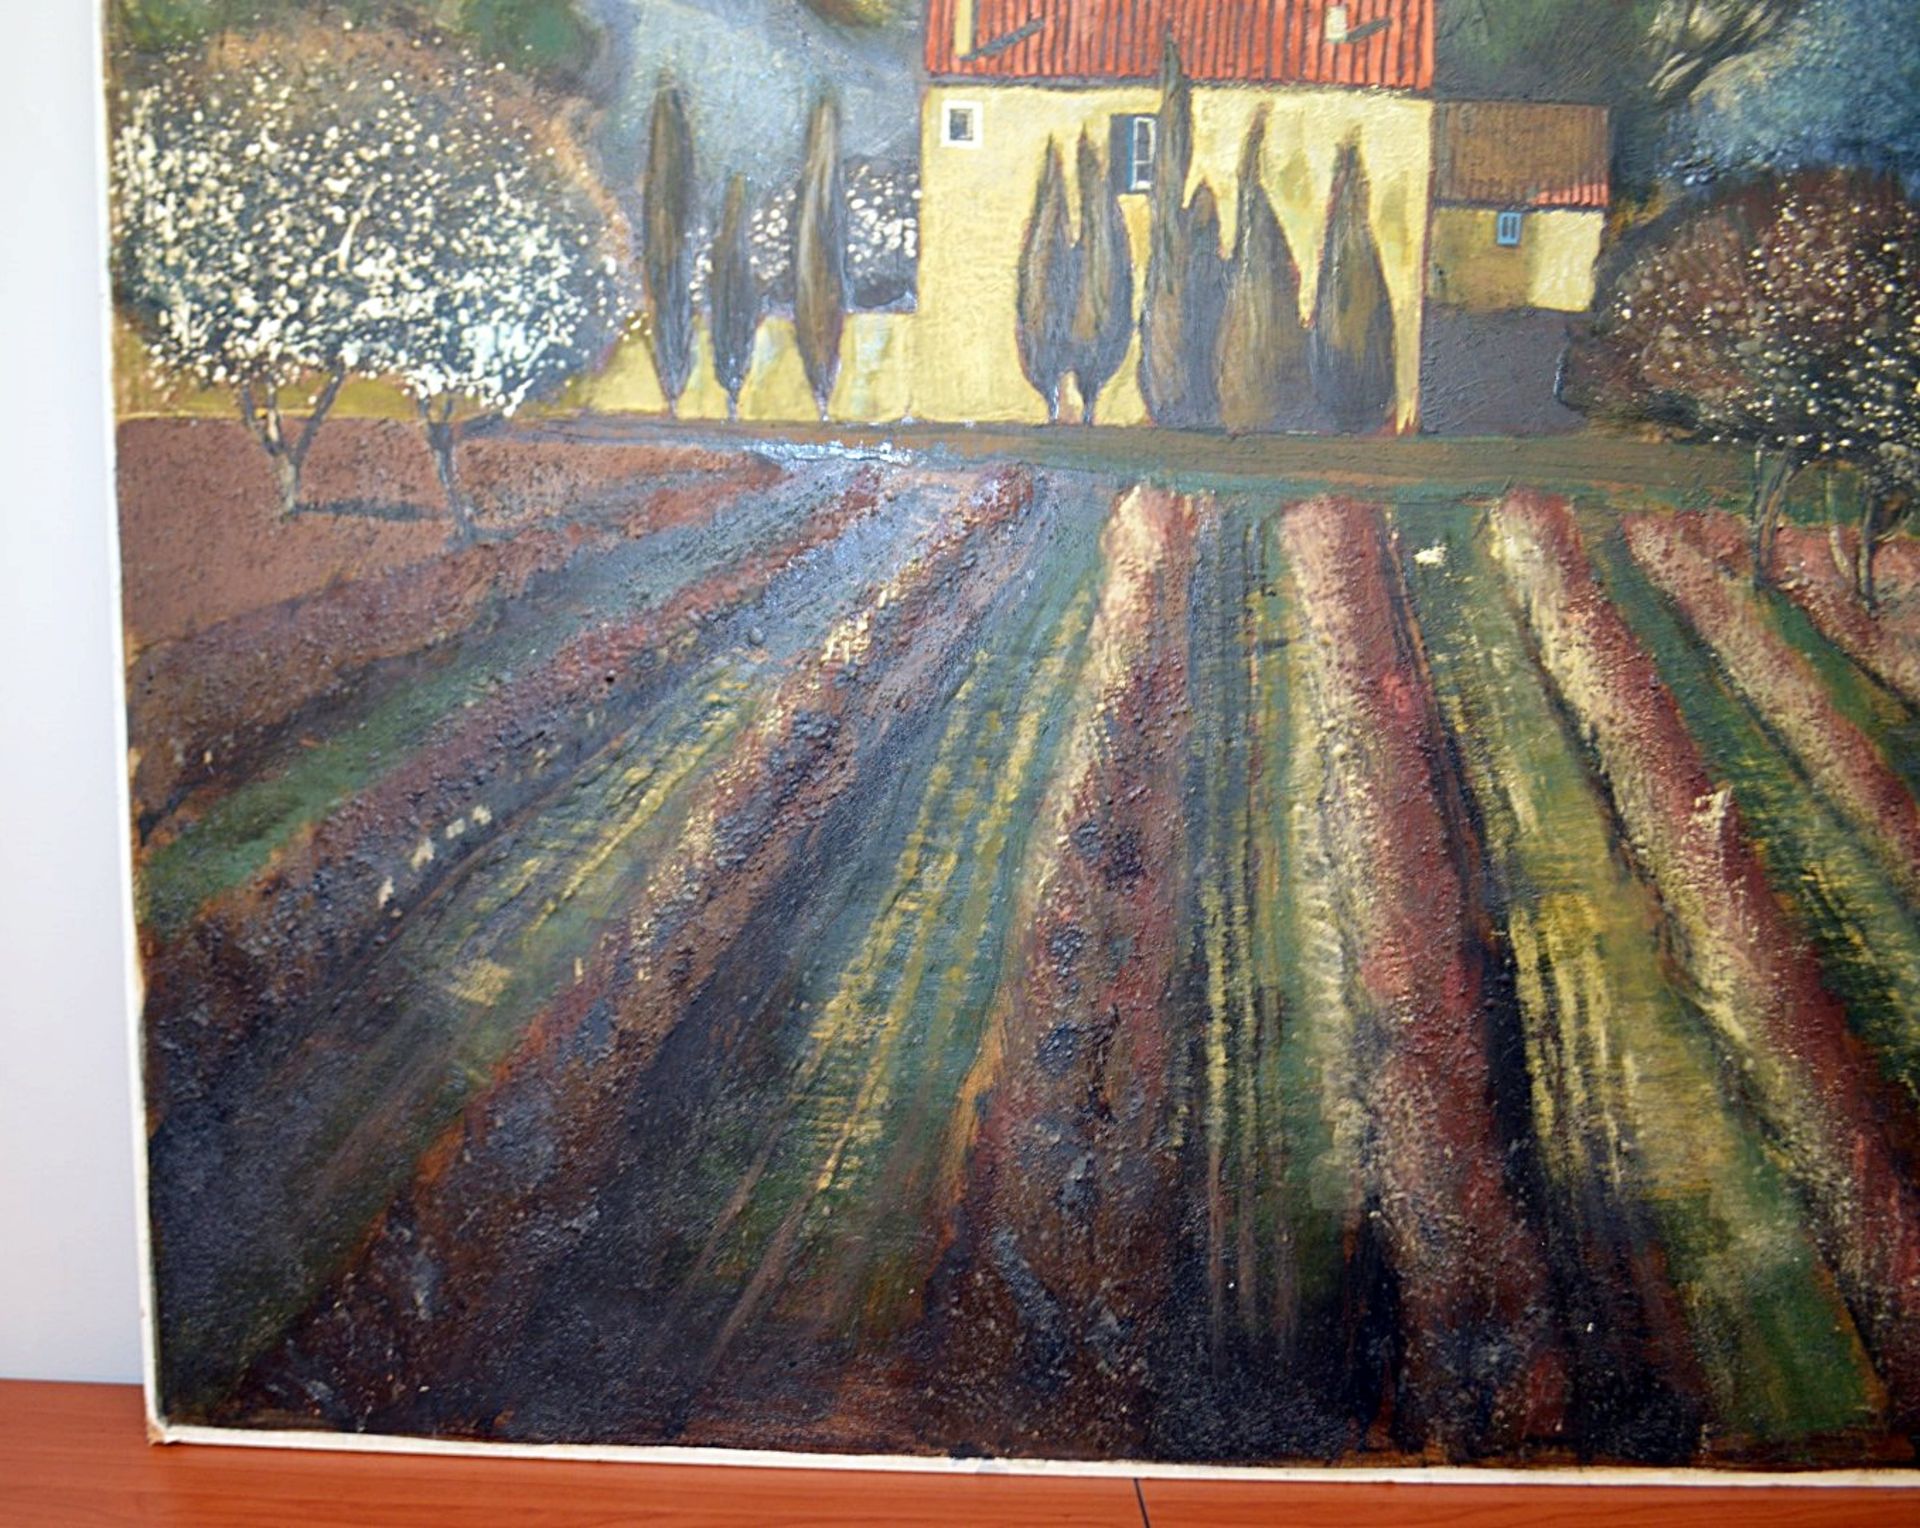 1 x Original Signed Painting Of A Farmhouse In France By Lydia Bauman (1998) - Dimensions: 122 x - Image 3 of 9